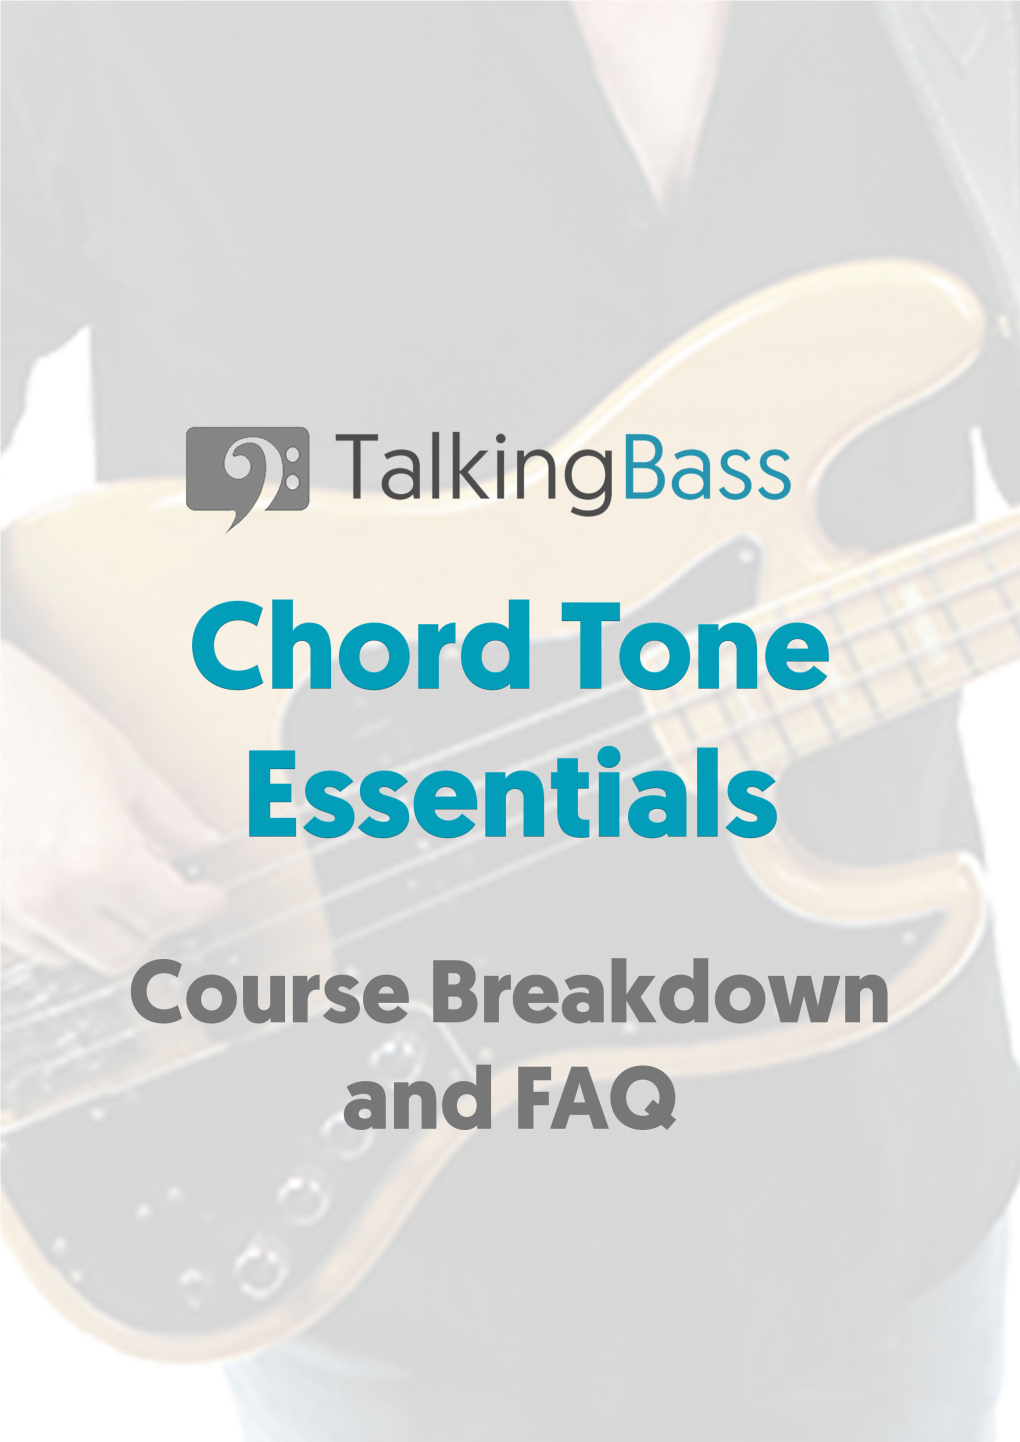 Chord Tone Essentials Unlock the Door to a World of Musical Possibilities Chord Tones Are Your Key to Better Bass Practice!